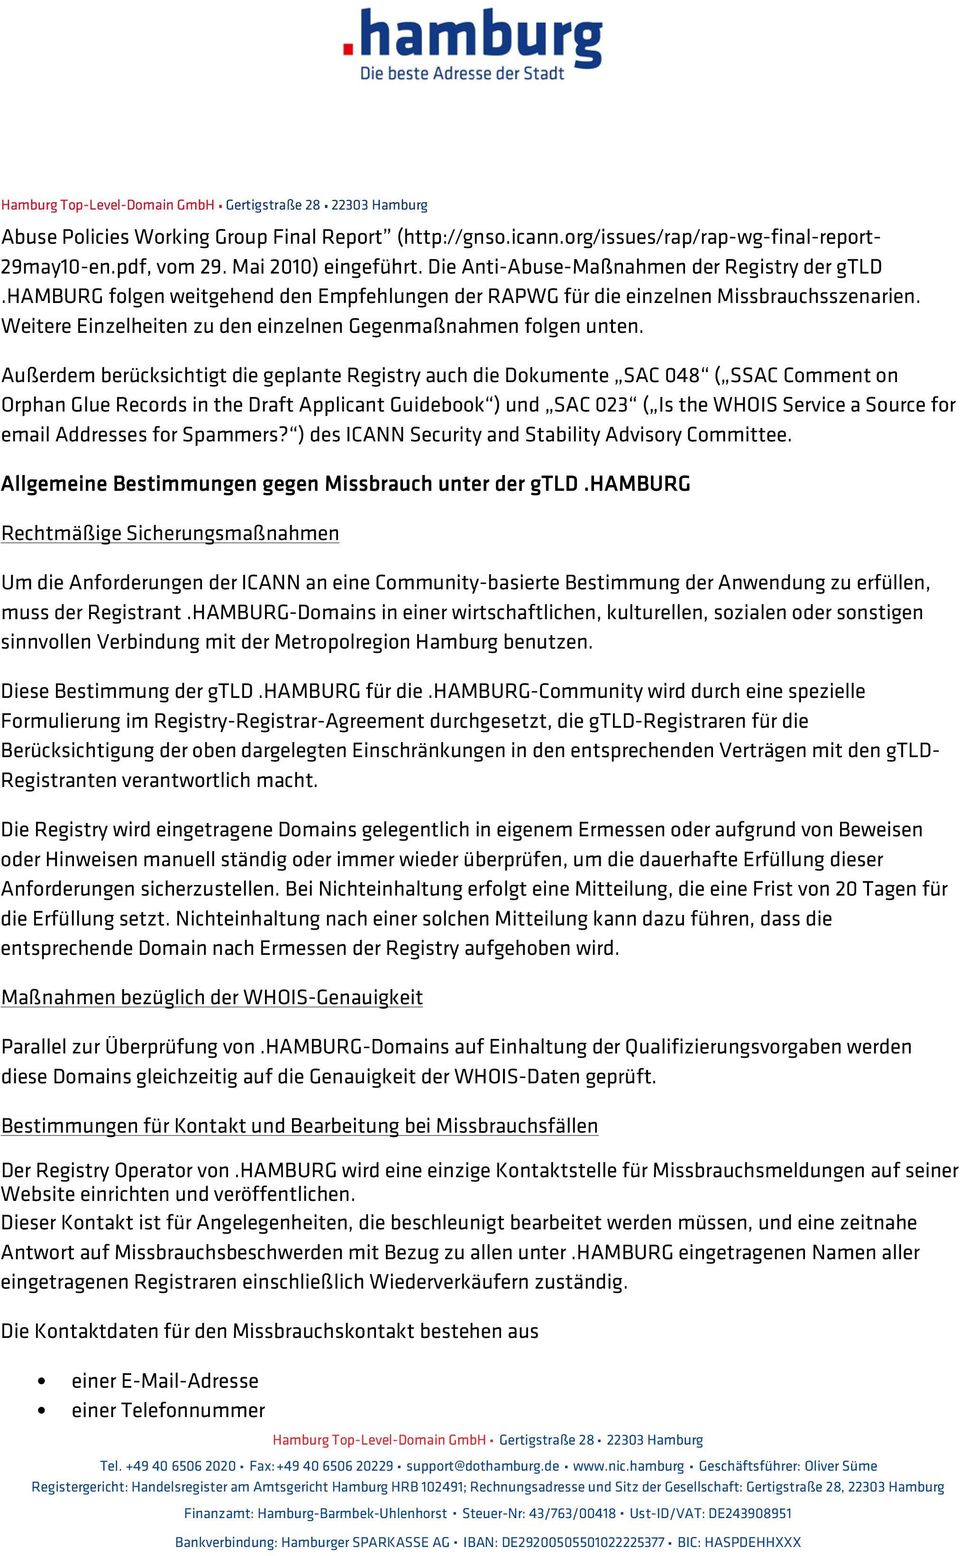 Außerdem berücksichtigt die geplante Registry auch die Dokumente SAC 048 ( SSAC Comment on Orphan Glue Records in the Draft Applicant Guidebook ) und SAC 023 ( Is the WHOIS Service a Source for email